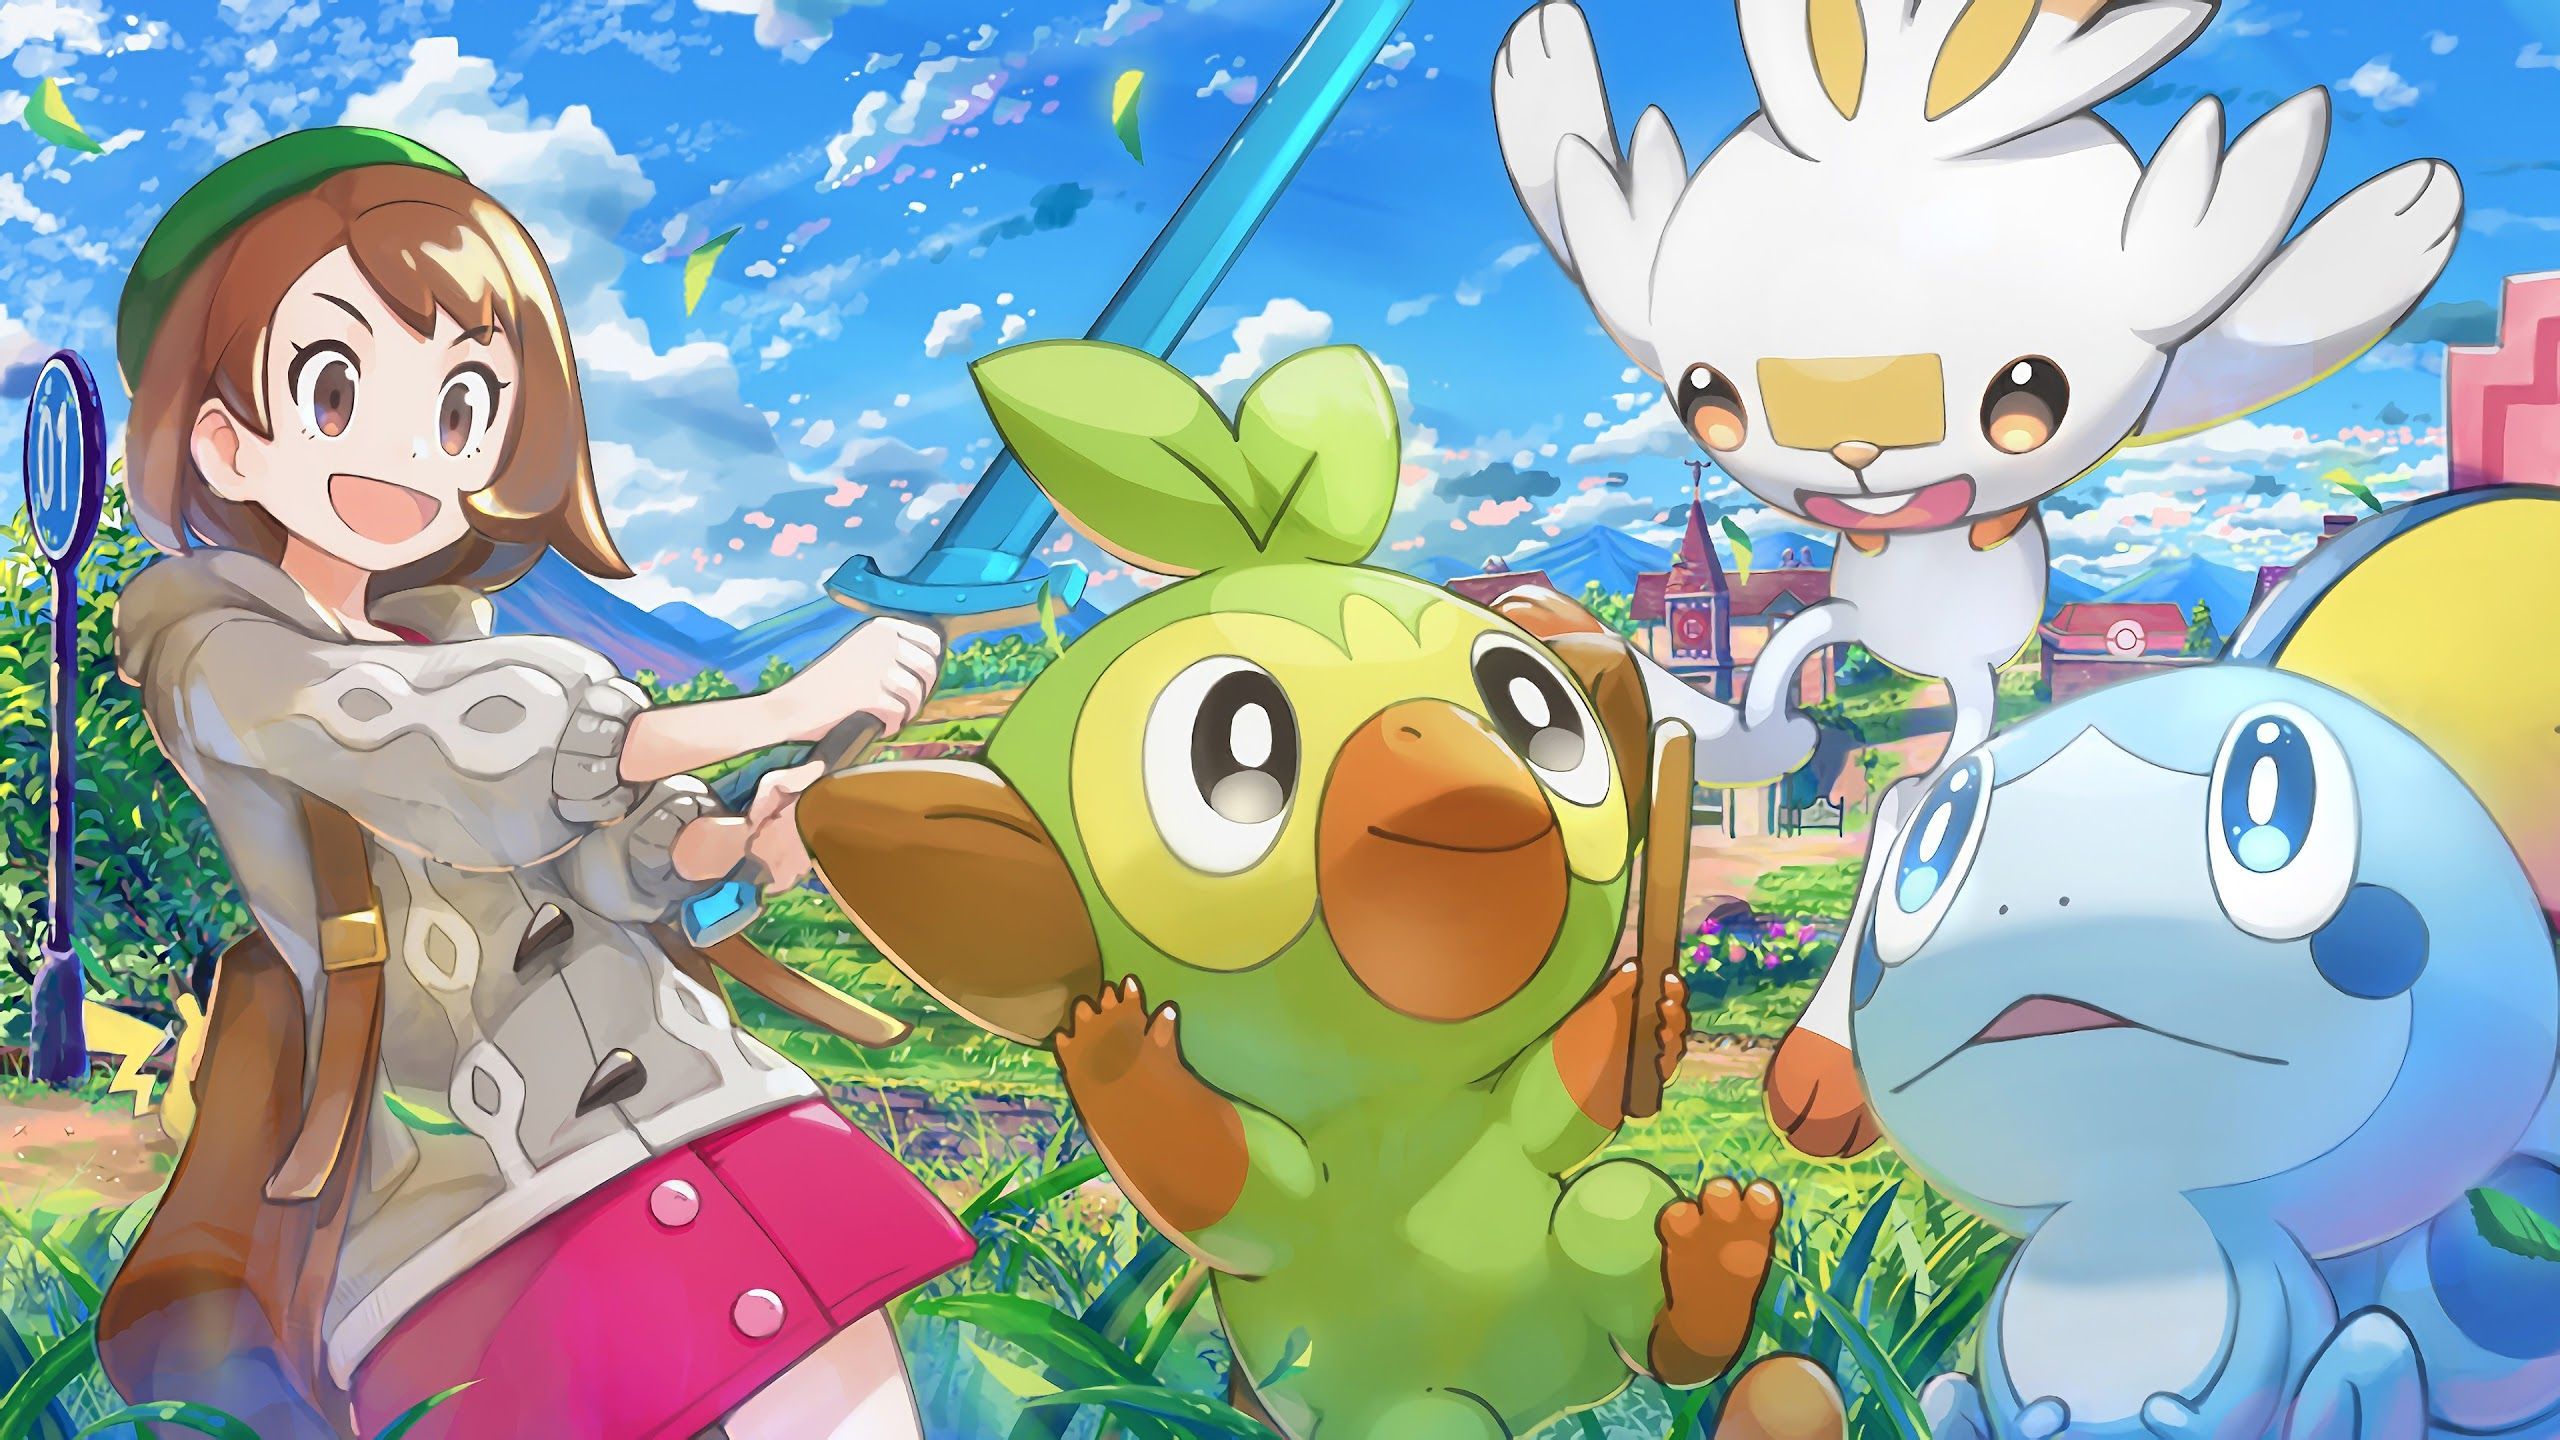 Pokemon Sword & Shield Review: A Fun Entry in a Stale Series